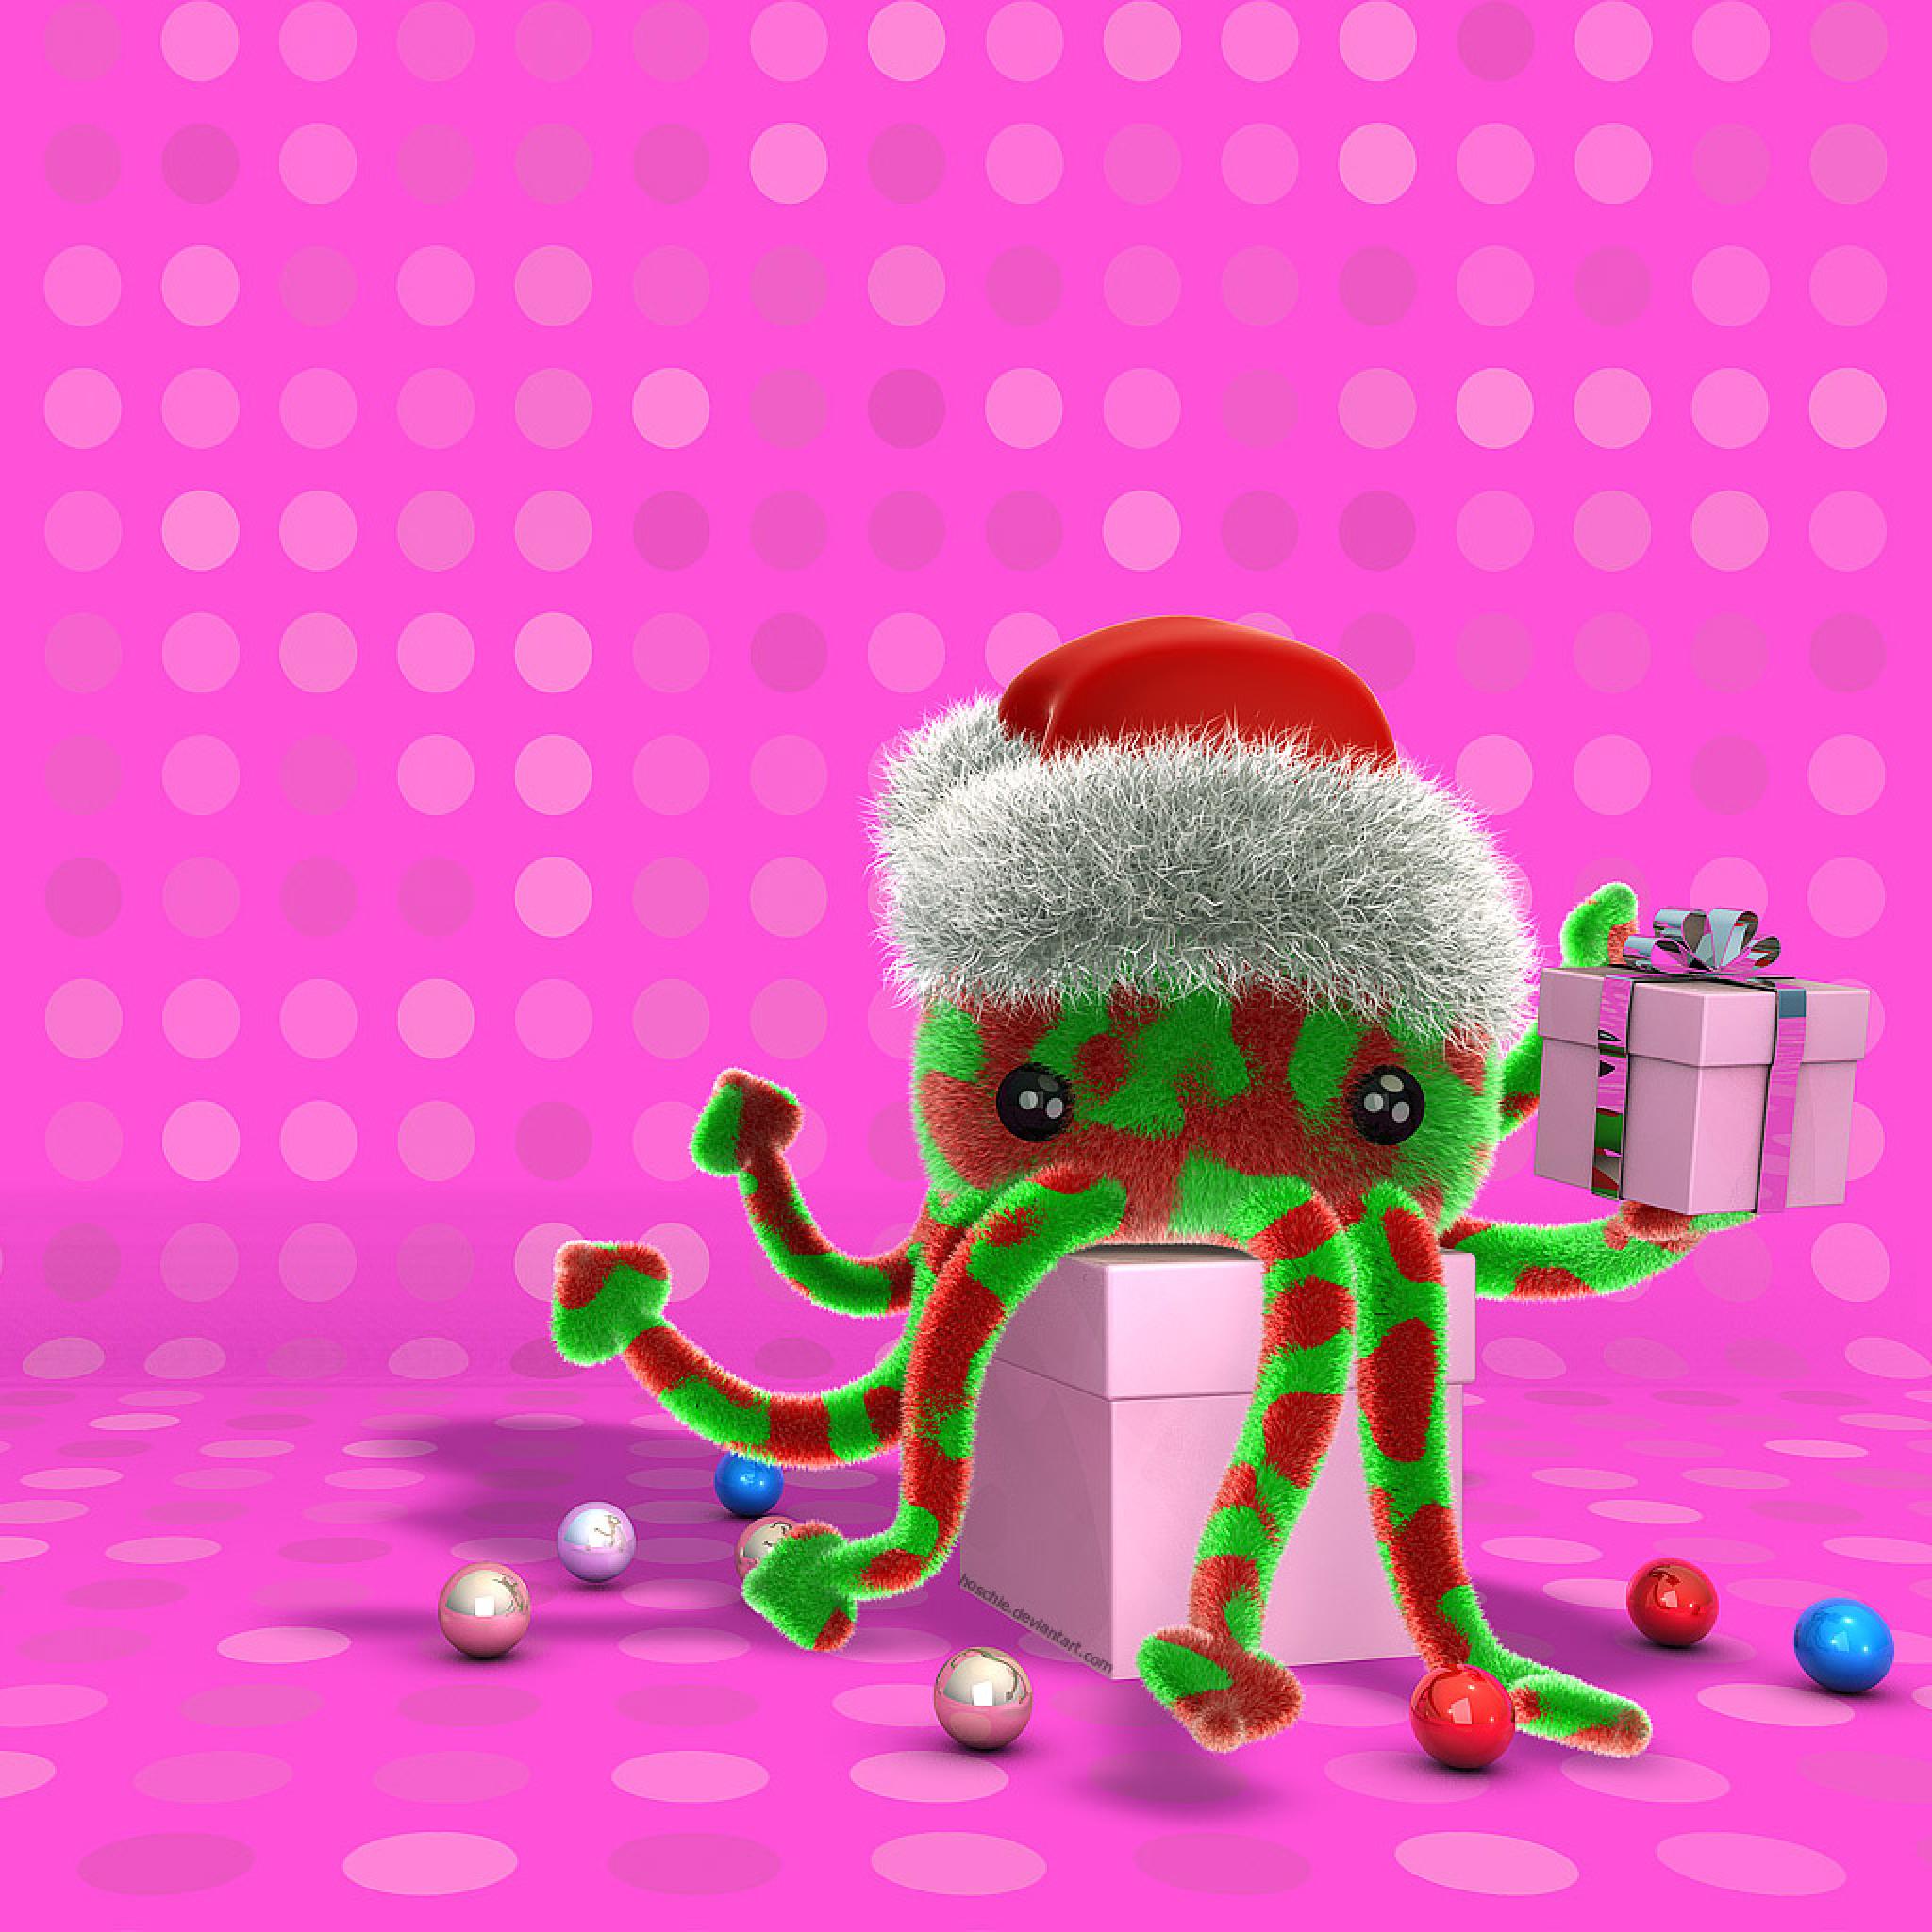 Fun Humor Octopus And Funny Christmas Gifts IPhone HD Wallpaper Free